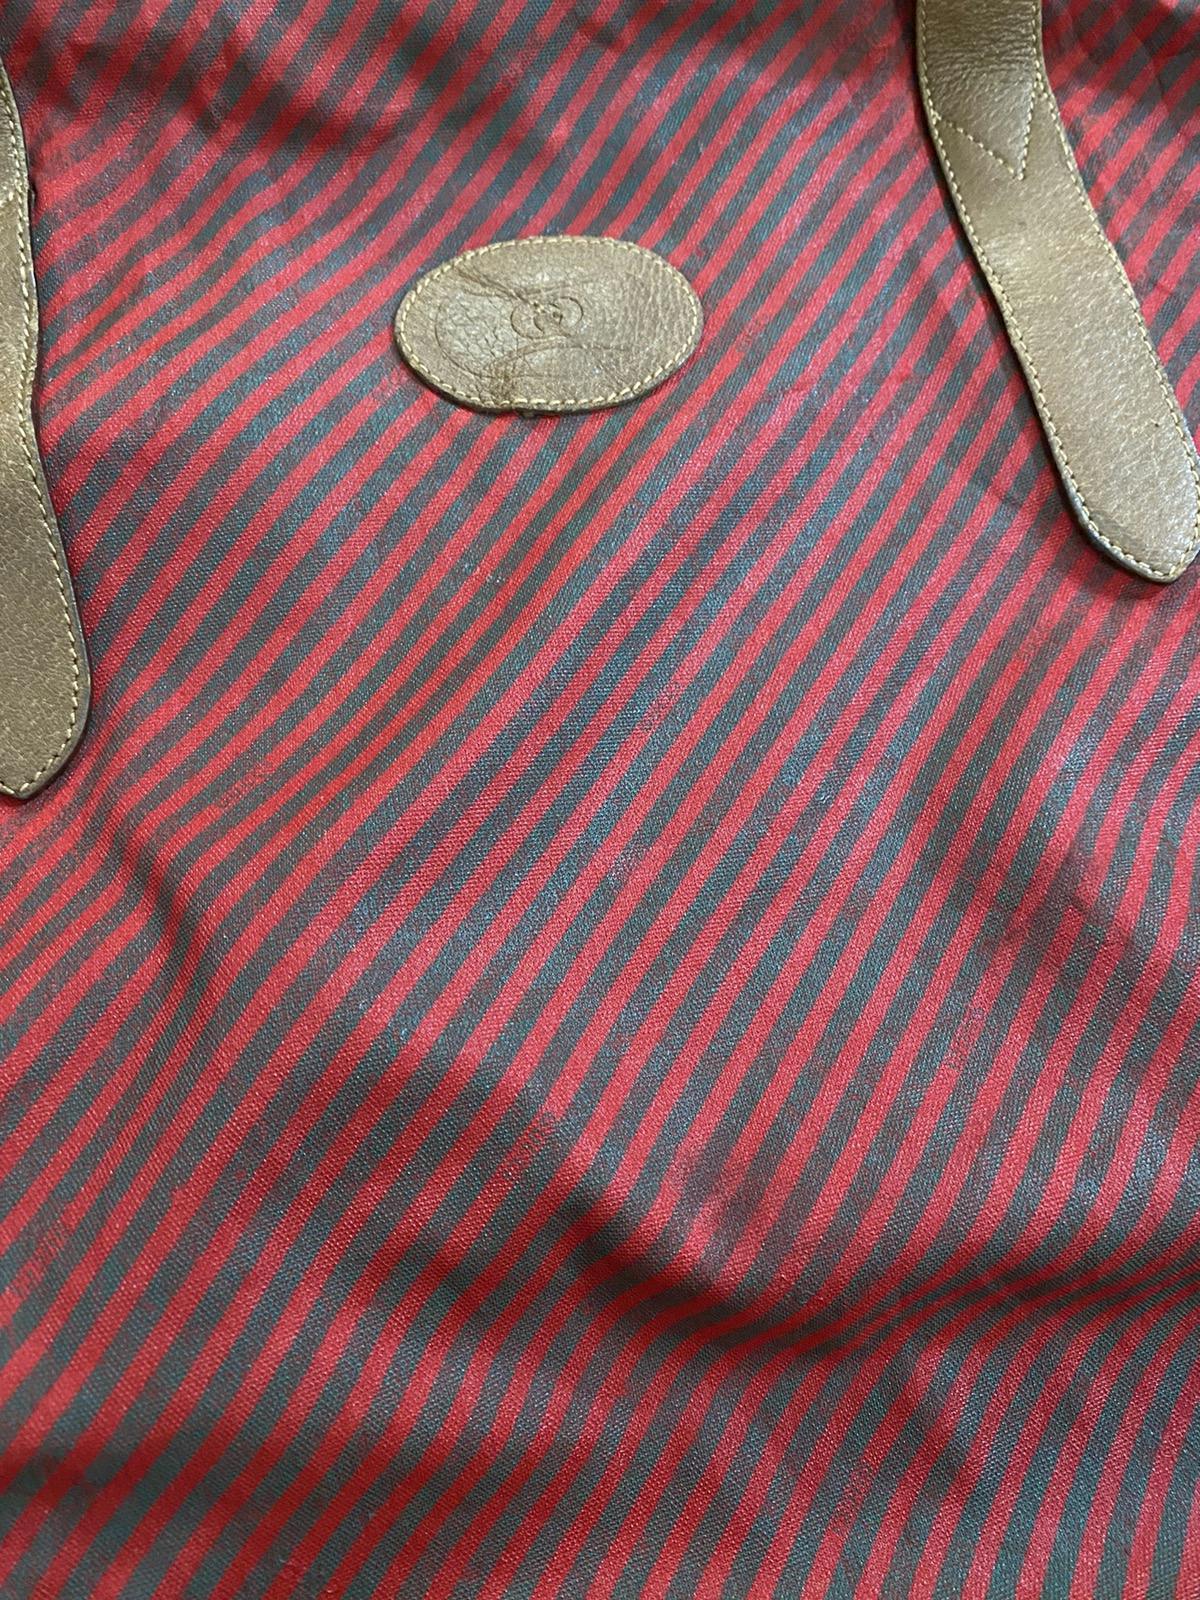 Vintage GUCCI Accessory Collection Striped Travel Duffle Bag - 6